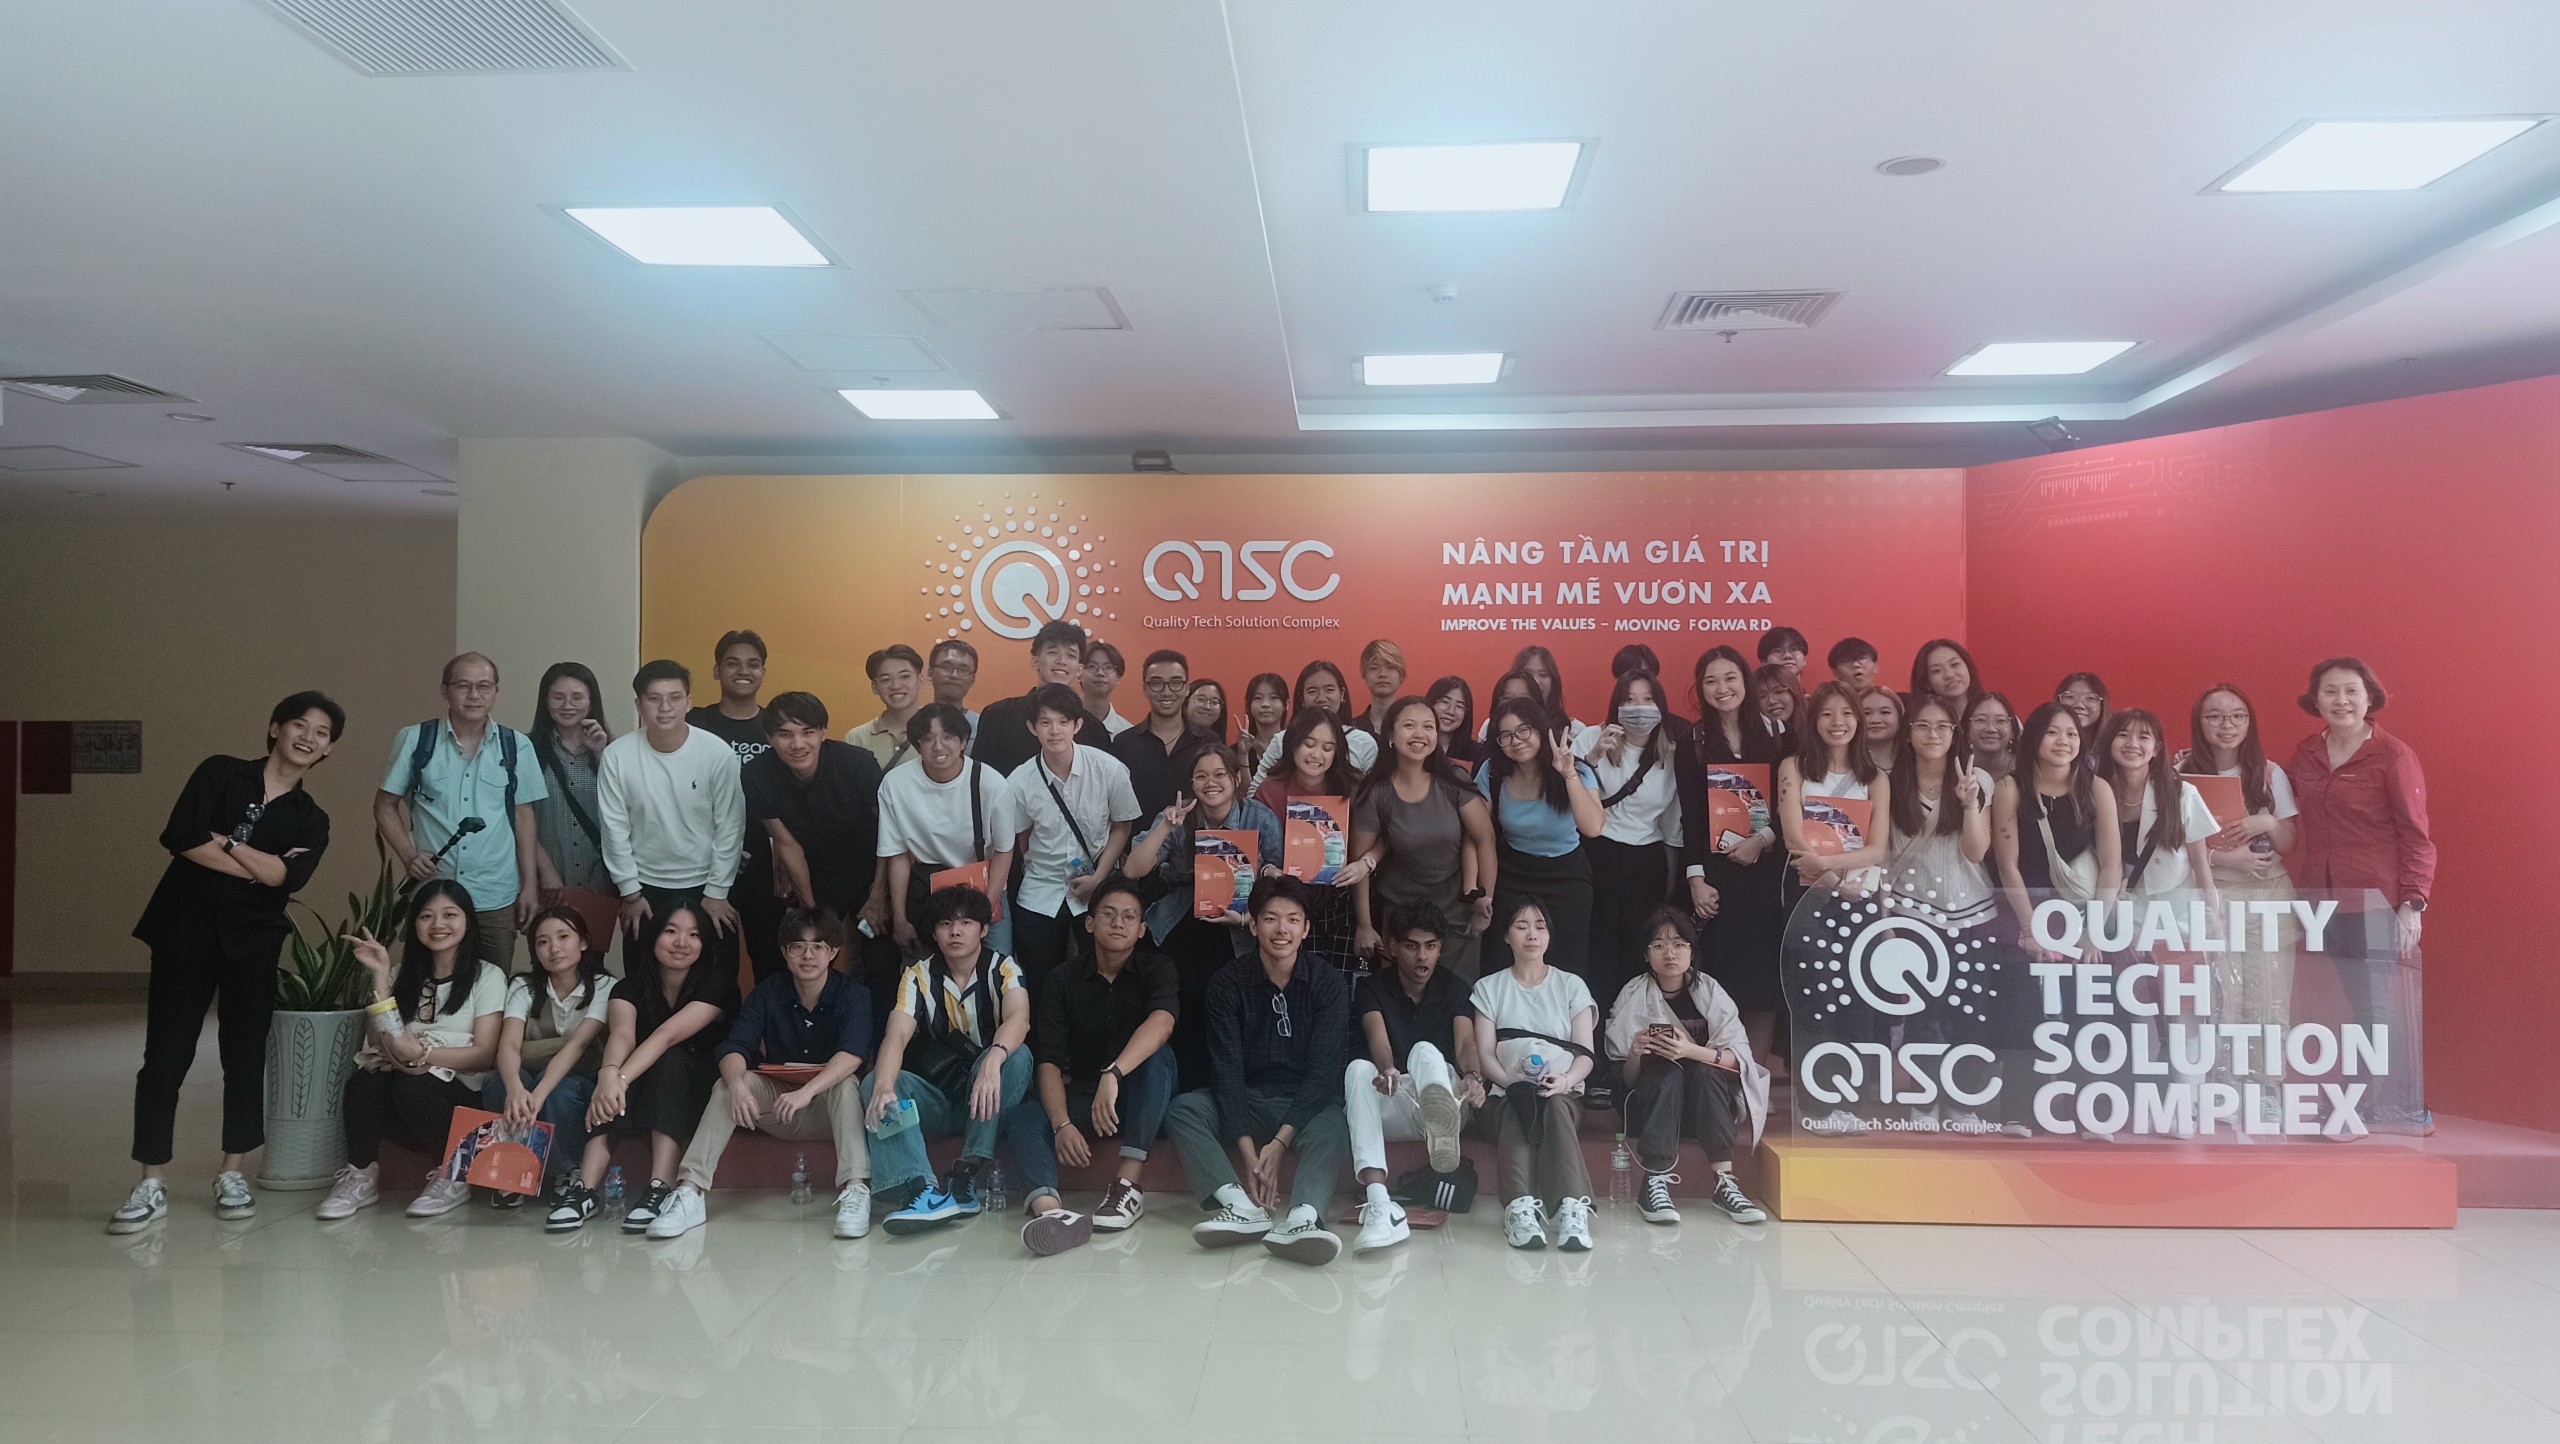 Students at Ngee Ann Polytechnic, Singapore to visit QTSC